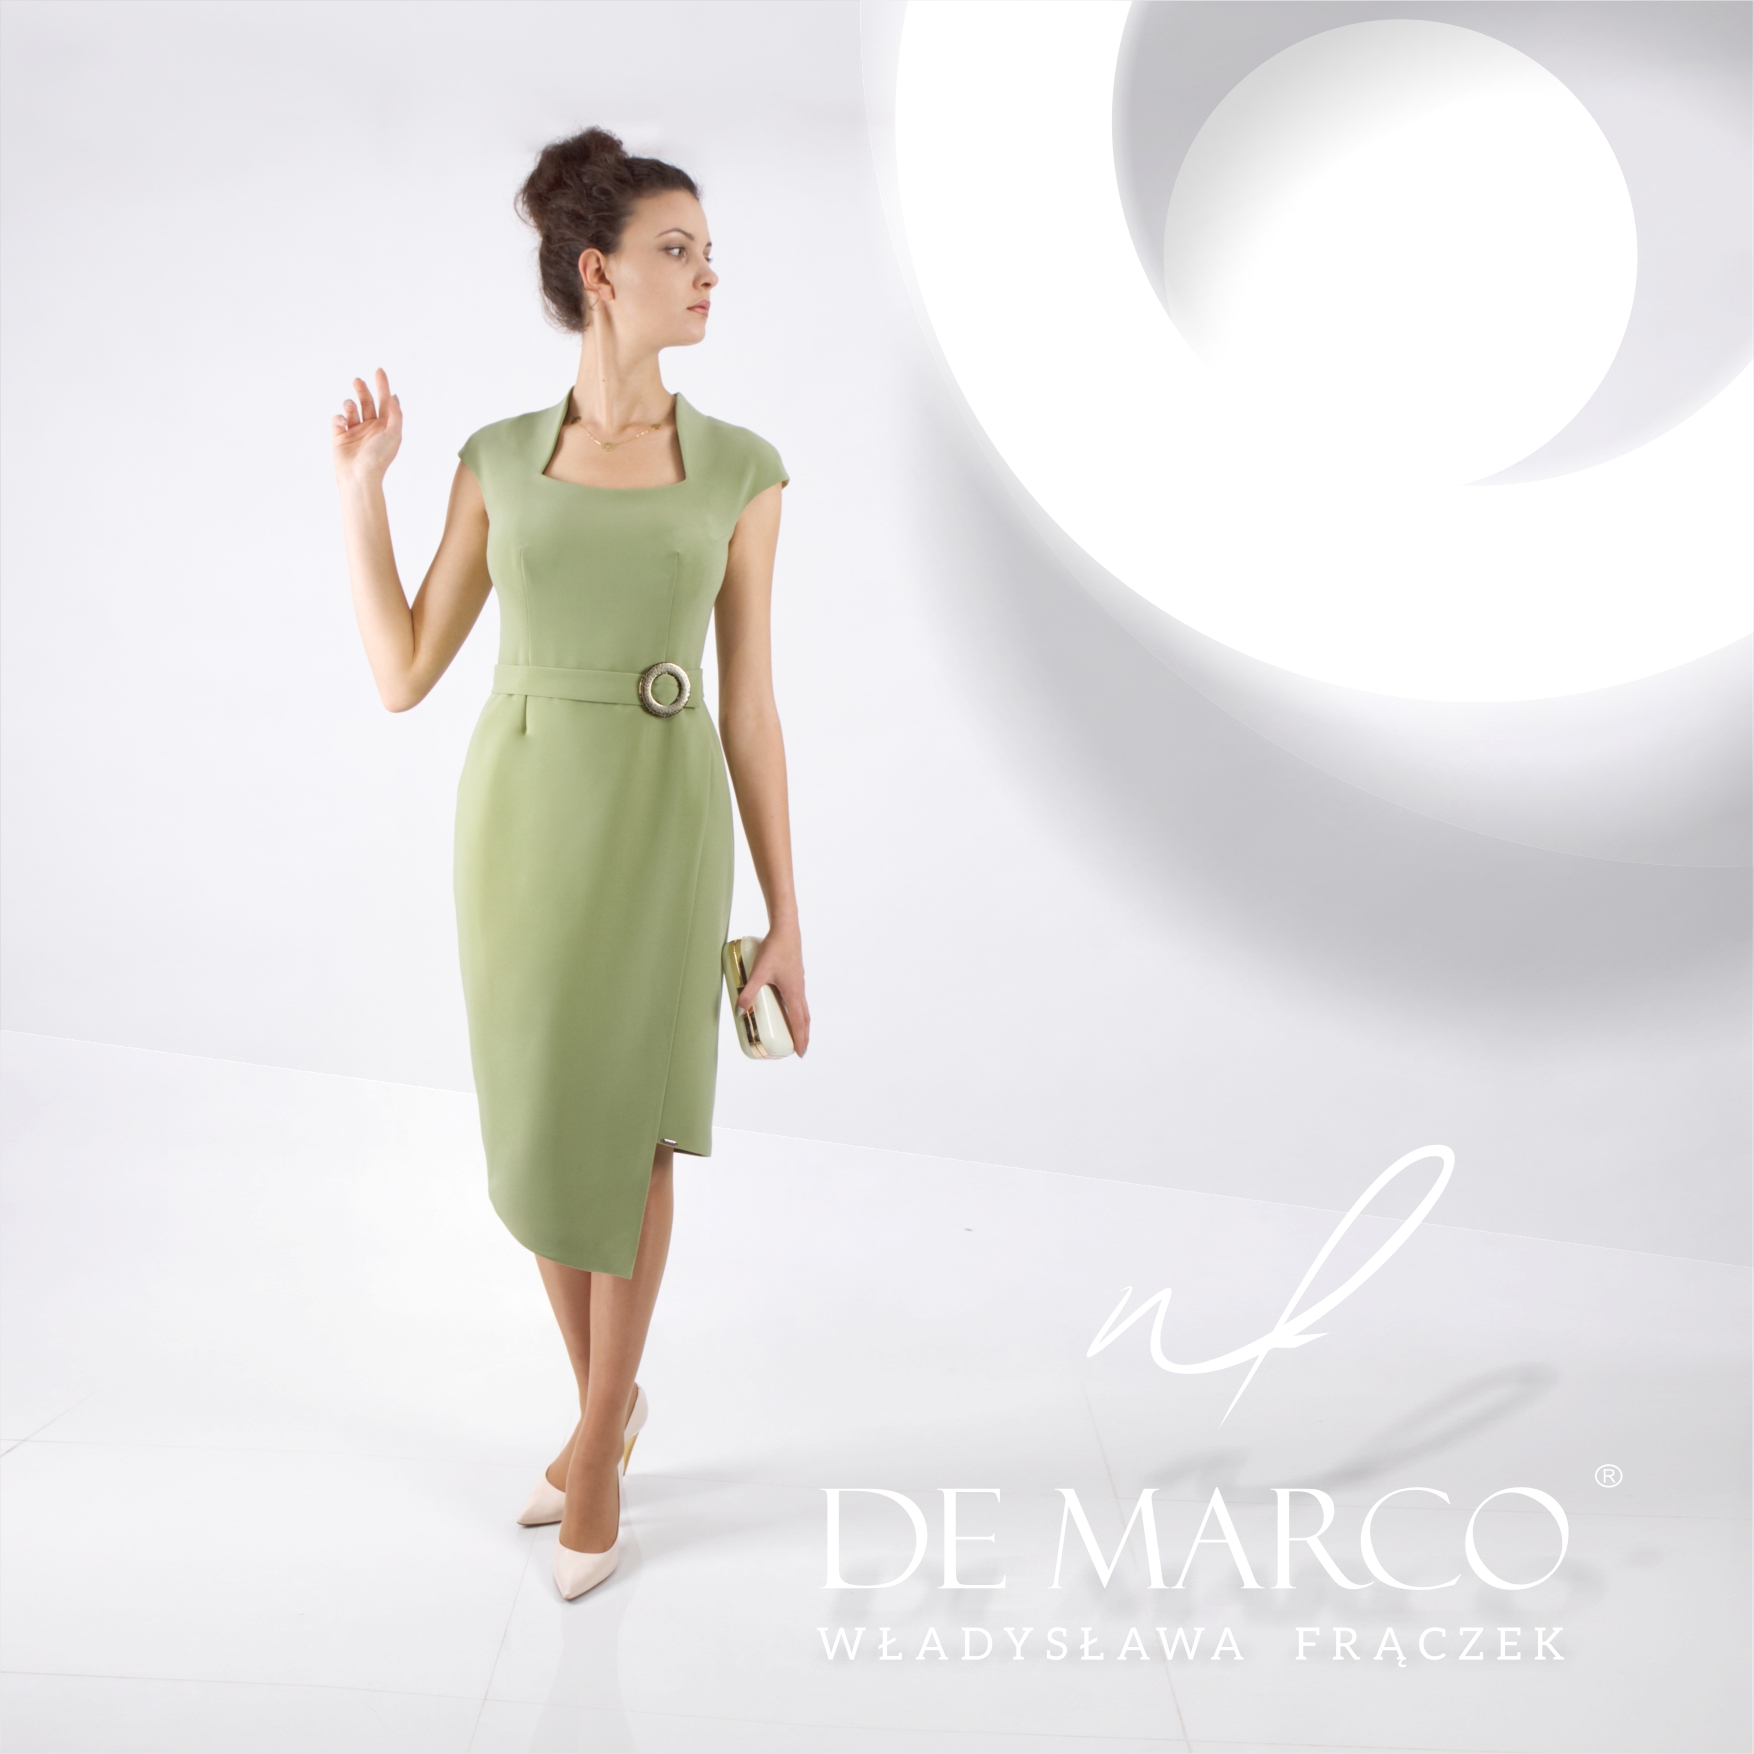 An elegant formal dress for late summer and autumn. De Marco made-to-measure